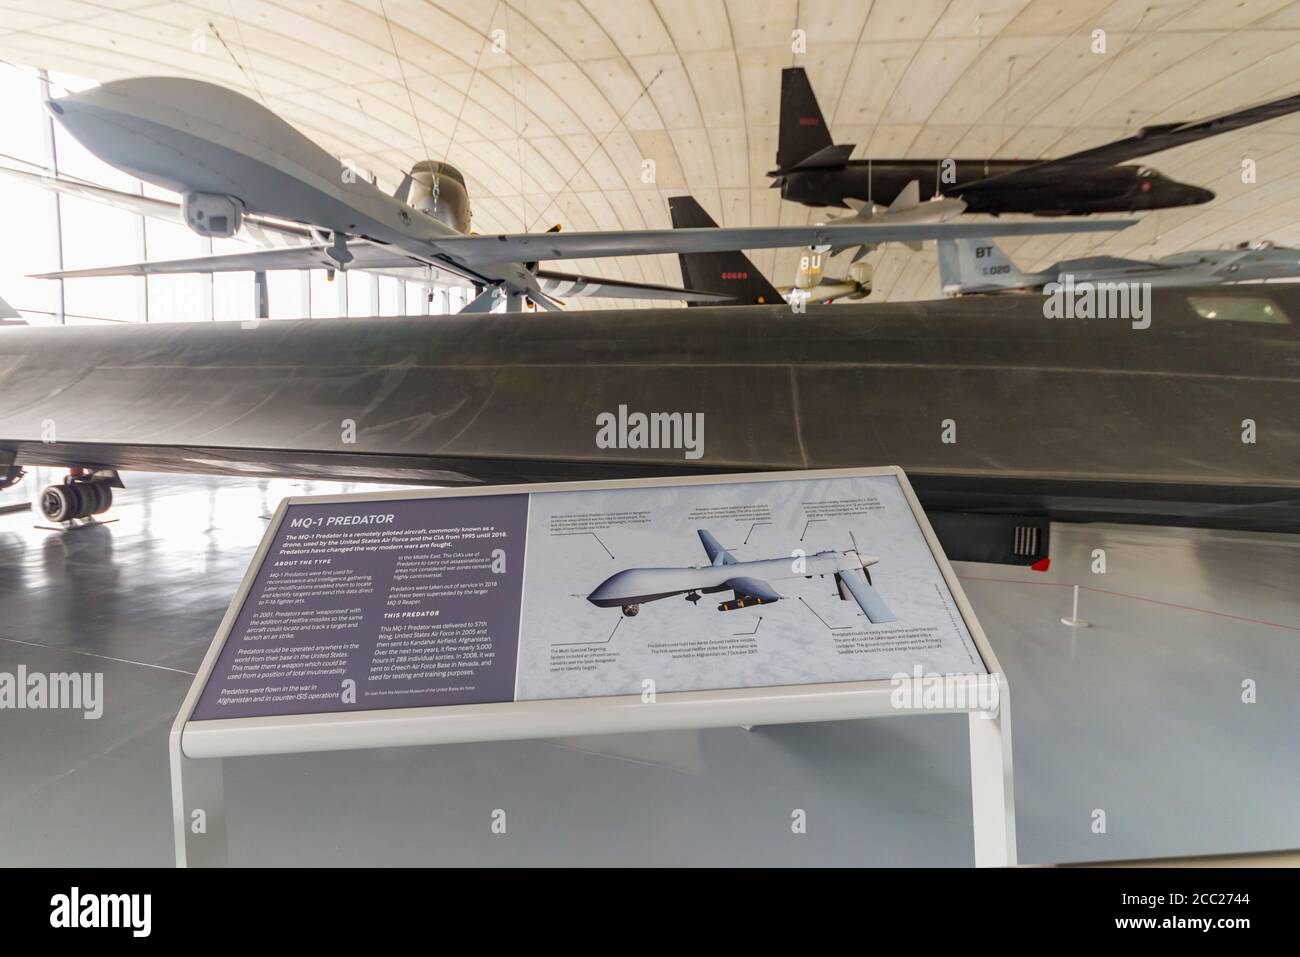 General Atomics MQ-1 Predator inside the American Air Museum, Imperial War Museum, Duxford, Cambridgeshire, UK. Remotely piloted aircraft (RPA) drone Stock Photo